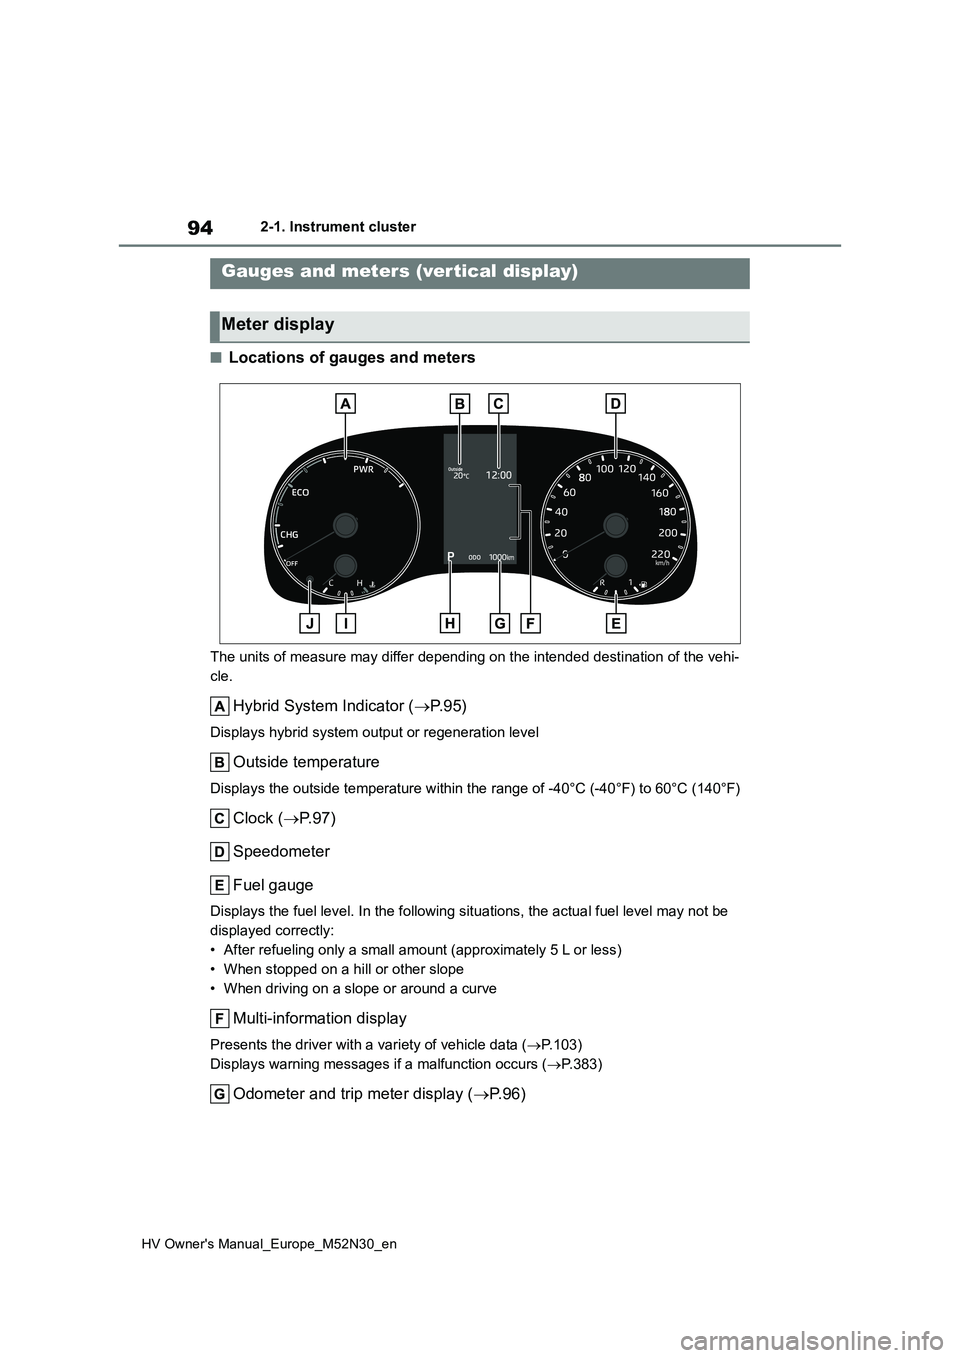 TOYOTA YARIS 2022  Owners Manual 94
HV Owner's Manual_Europe_M52N30_en
2-1. Instrument cluster
■Locations of gauges and meters
The units of measure may differ depending on the intended destination of the vehi- 
cle.
Hybrid Syst